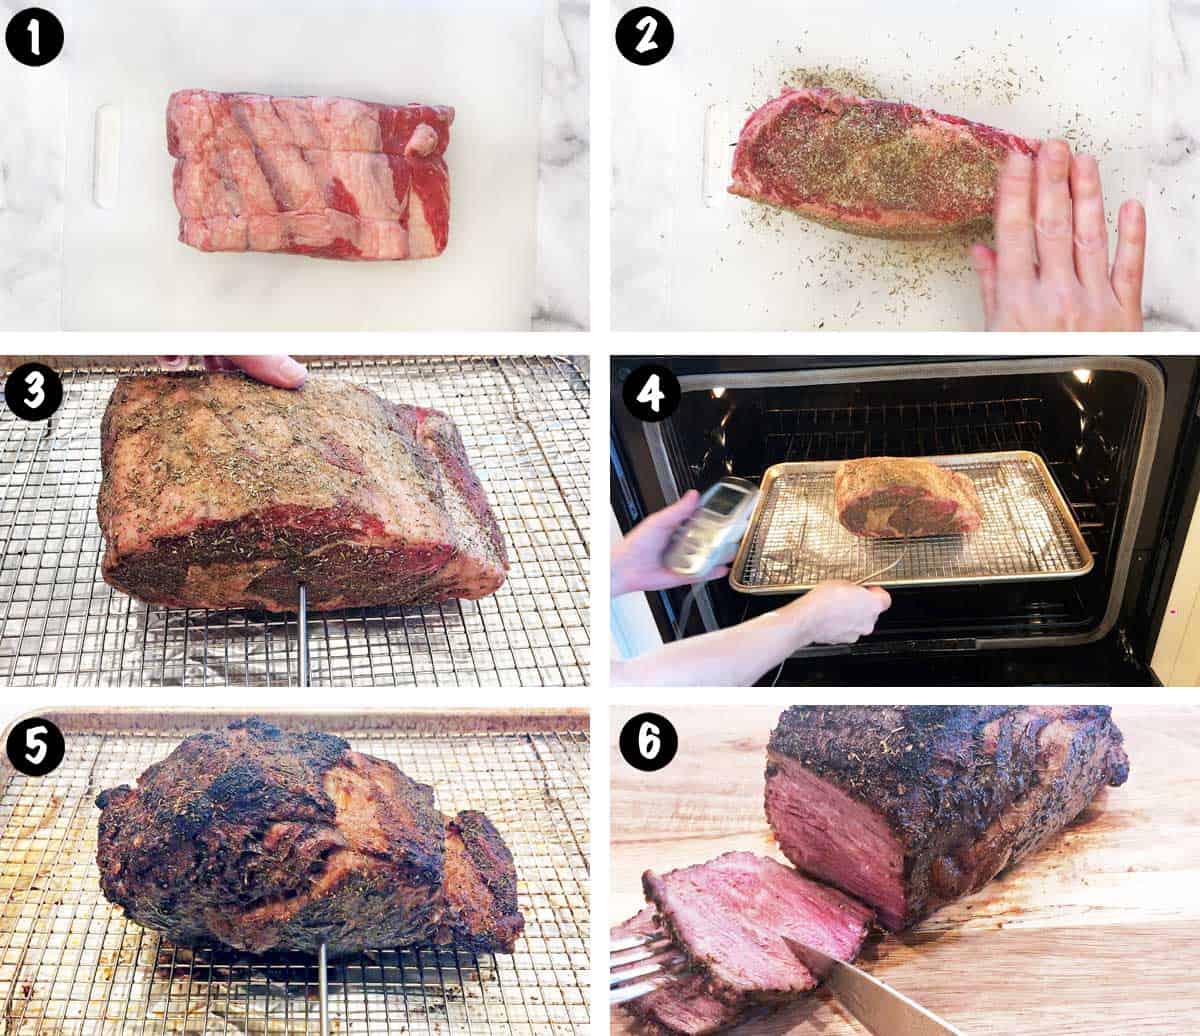 A six-photo collage showing the steps for cooking a ribeye roast. 